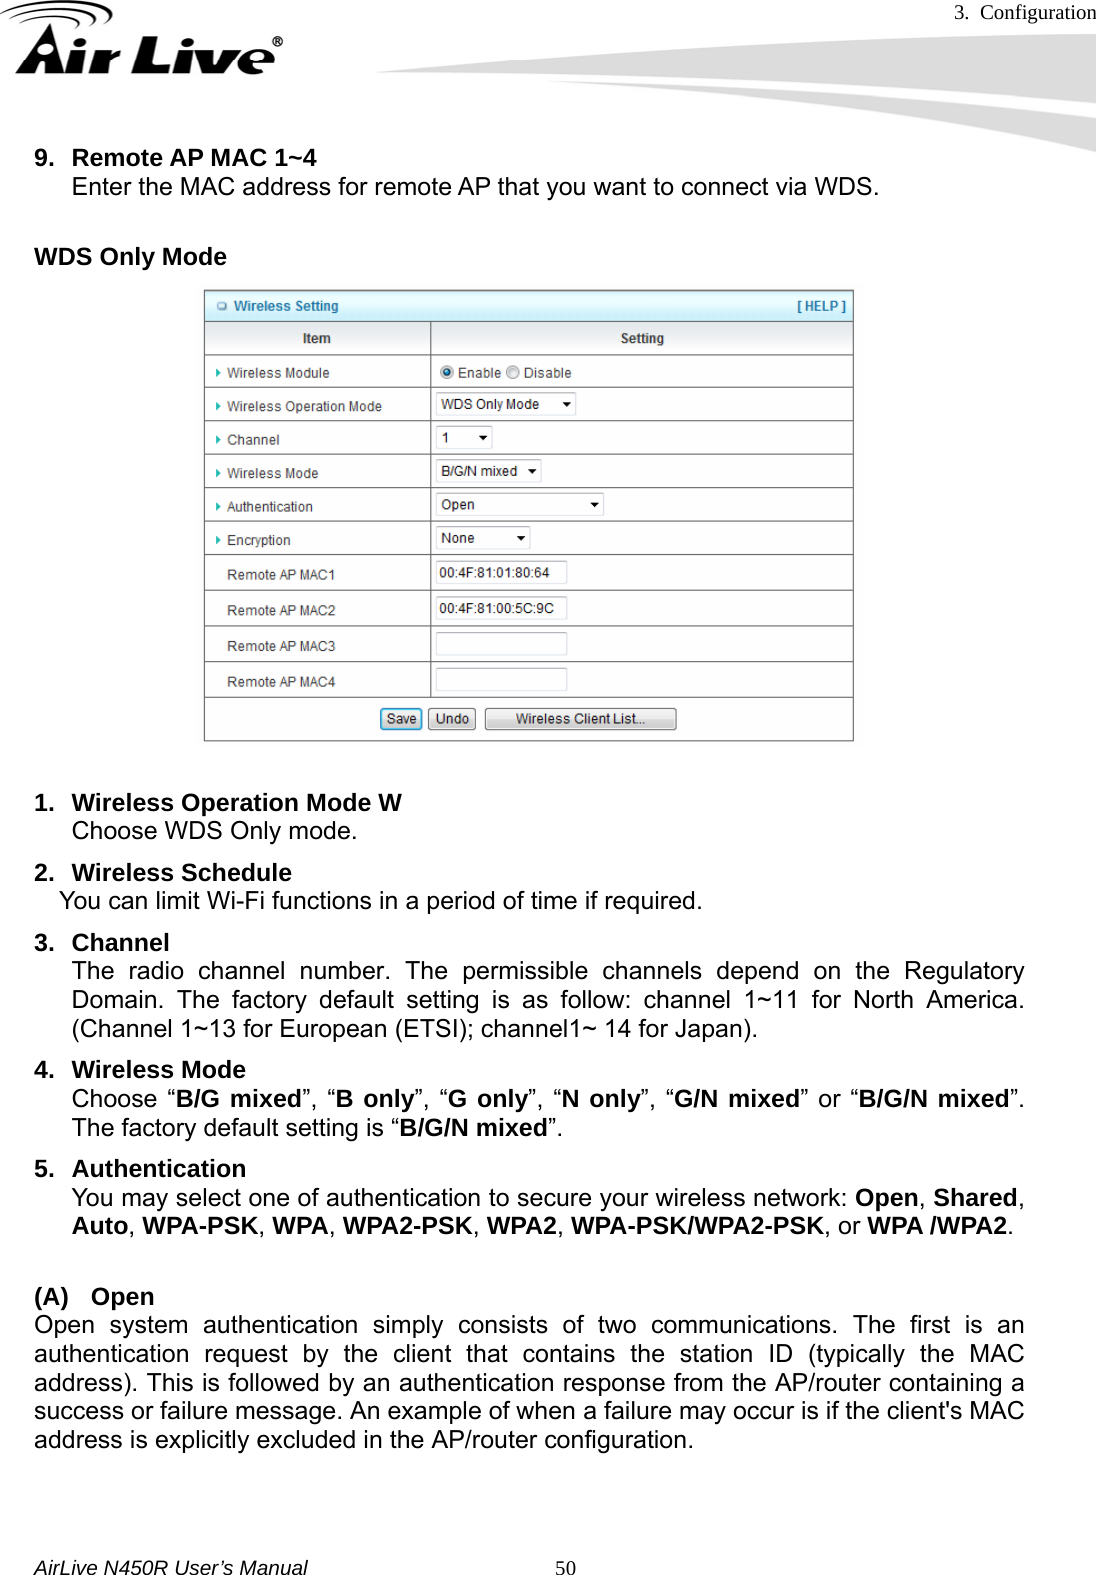 3. Configuration     AirLive N450R User’s Manual   509.  Remote AP MAC 1~4 Enter the MAC address for remote AP that you want to connect via WDS.  WDS Only Mode  1.  Wireless Operation Mode W  Choose WDS Only mode. 2. Wireless Schedule You can limit Wi-Fi functions in a period of time if required. 3. Channel The radio channel number. The permissible channels depend on the Regulatory Domain. The factory default setting is as follow: channel 1~11 for North America. (Channel 1~13 for European (ETSI); channel1~ 14 for Japan). 4. Wireless Mode Choose “B/G mixed”, “B only”, “G only”, “N only”, “G/N mixed” or “B/G/N mixed”. The factory default setting is “B/G/N mixed”. 5. Authentication  You may select one of authentication to secure your wireless network: Open, Shared, Auto, WPA-PSK, WPA, WPA2-PSK, WPA2, WPA-PSK/WPA2-PSK, or WPA /WPA2.  (A) Open Open system authentication simply consists of two communications. The first is an authentication request by the client that contains the station ID (typically the MAC address). This is followed by an authentication response from the AP/router containing a success or failure message. An example of when a failure may occur is if the client&apos;s MAC address is explicitly excluded in the AP/router configuration.    